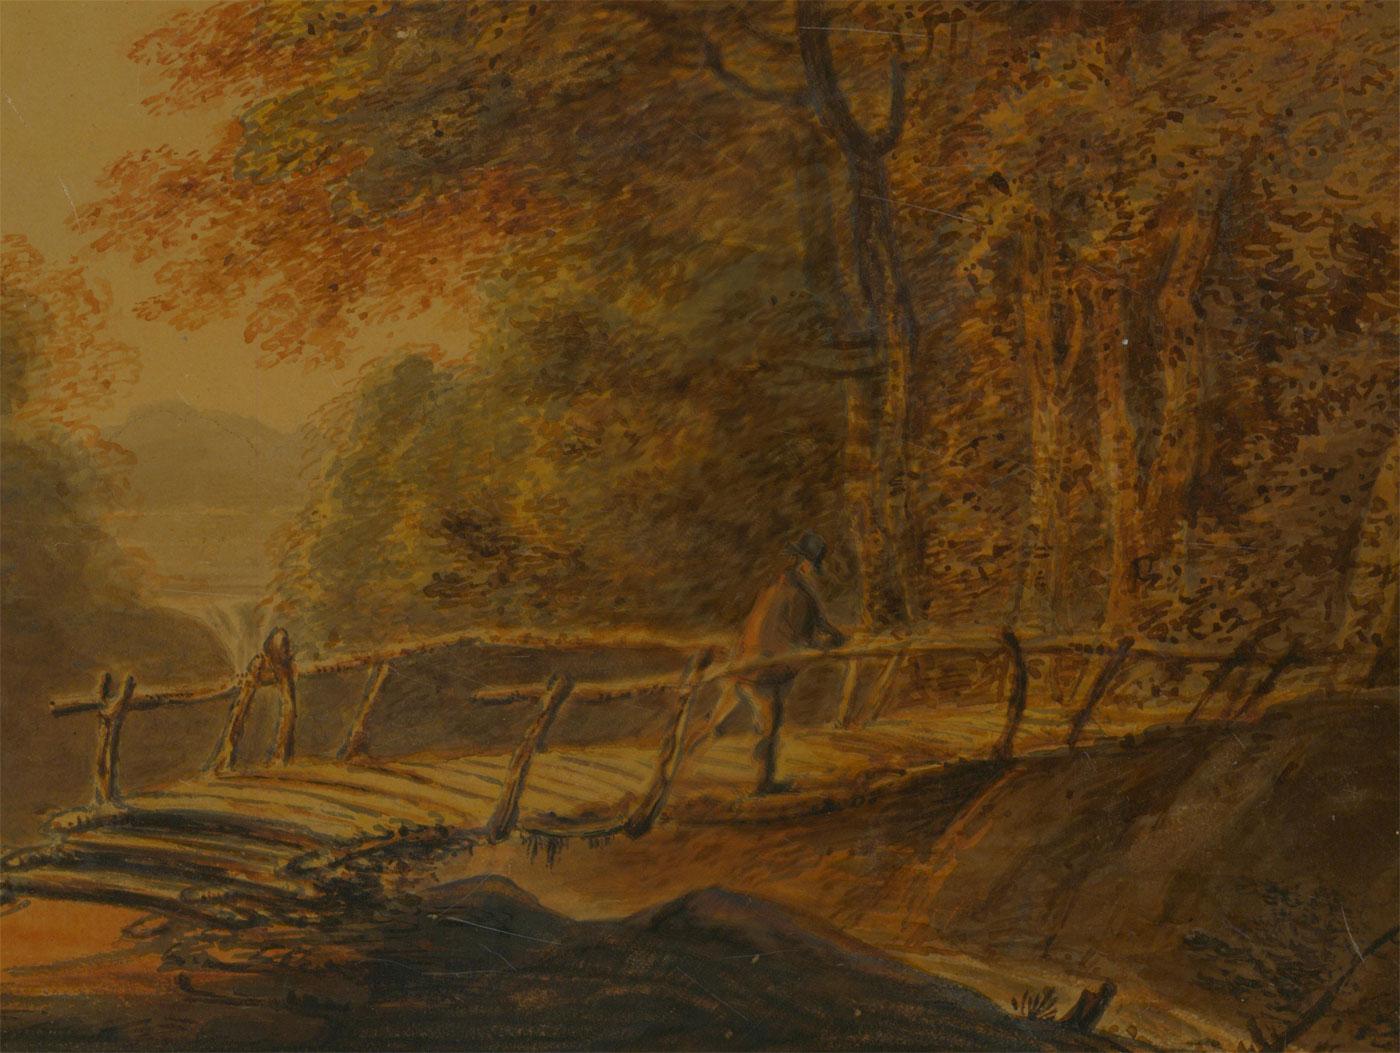 A very fine early 19th Century watercolour, attributed to the Welsh painter John Downman ARA (1750-1824). The scene shows a figure pausing on a wooden footbridge crossing over the crest of a waterfall. Another fall can be seen in the distance,